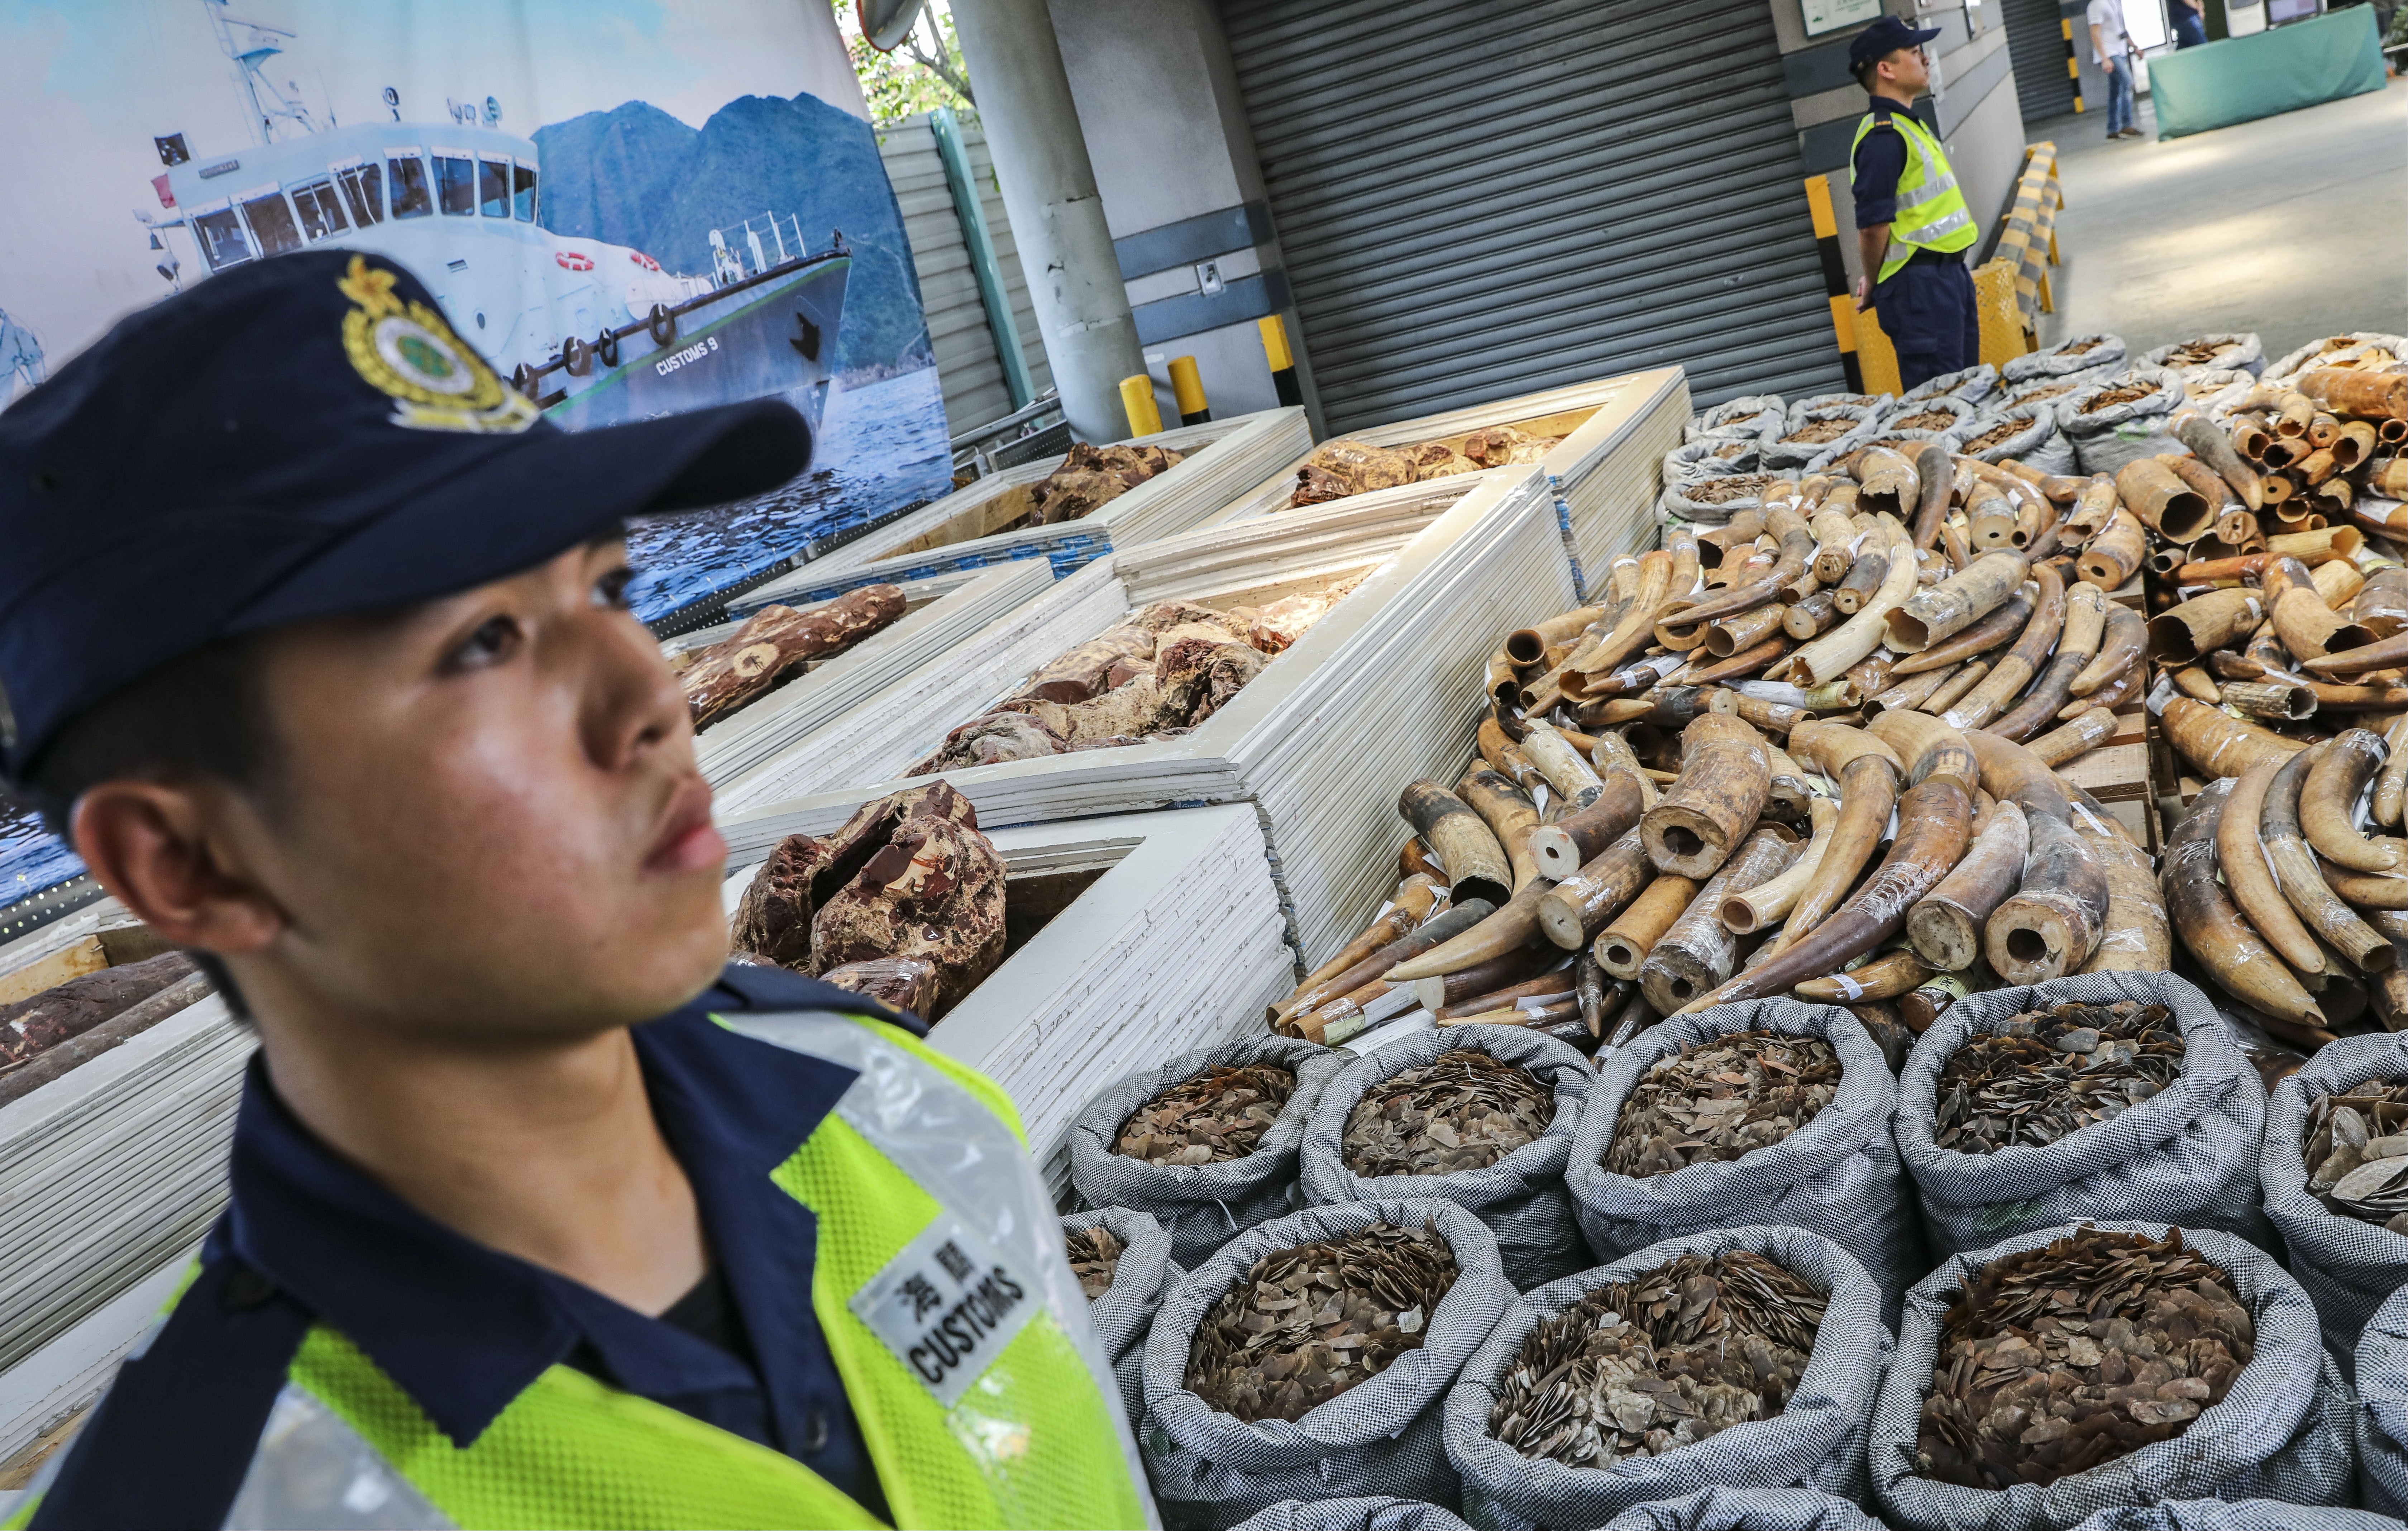 A Customs and Excise Department officer stands guard next to a seized shipment of ivory and pangolin scales, in September 2018. Photo: K.Y. Cheng